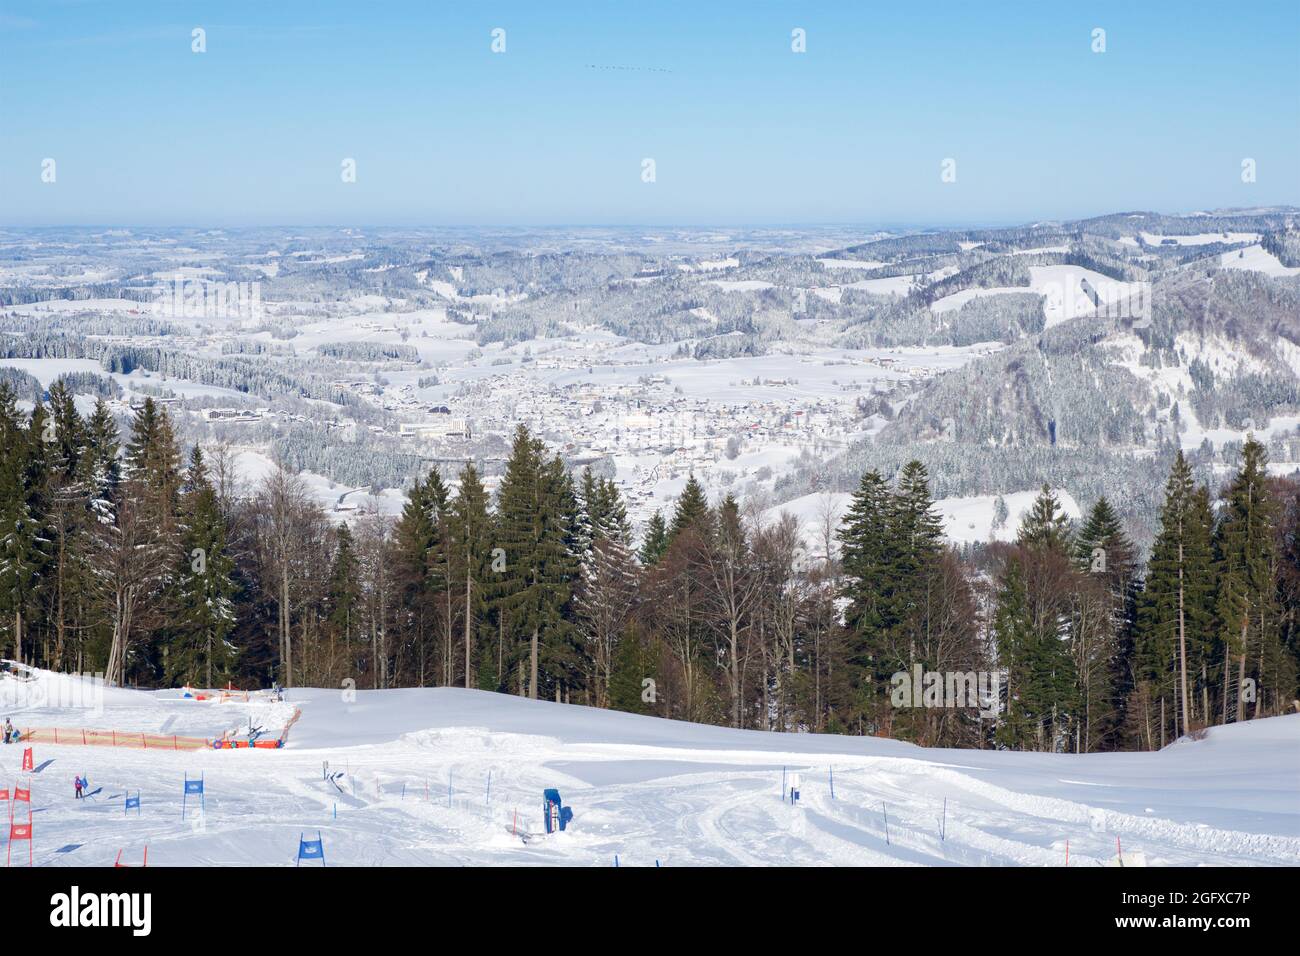 OBERSTAUFEN, GERMANY - 29 DEC, 2017: Beautiful view of the snowy winter resort Oberstaufen with a ski slope in the foreground in the Bavarian Alps Stock Photo